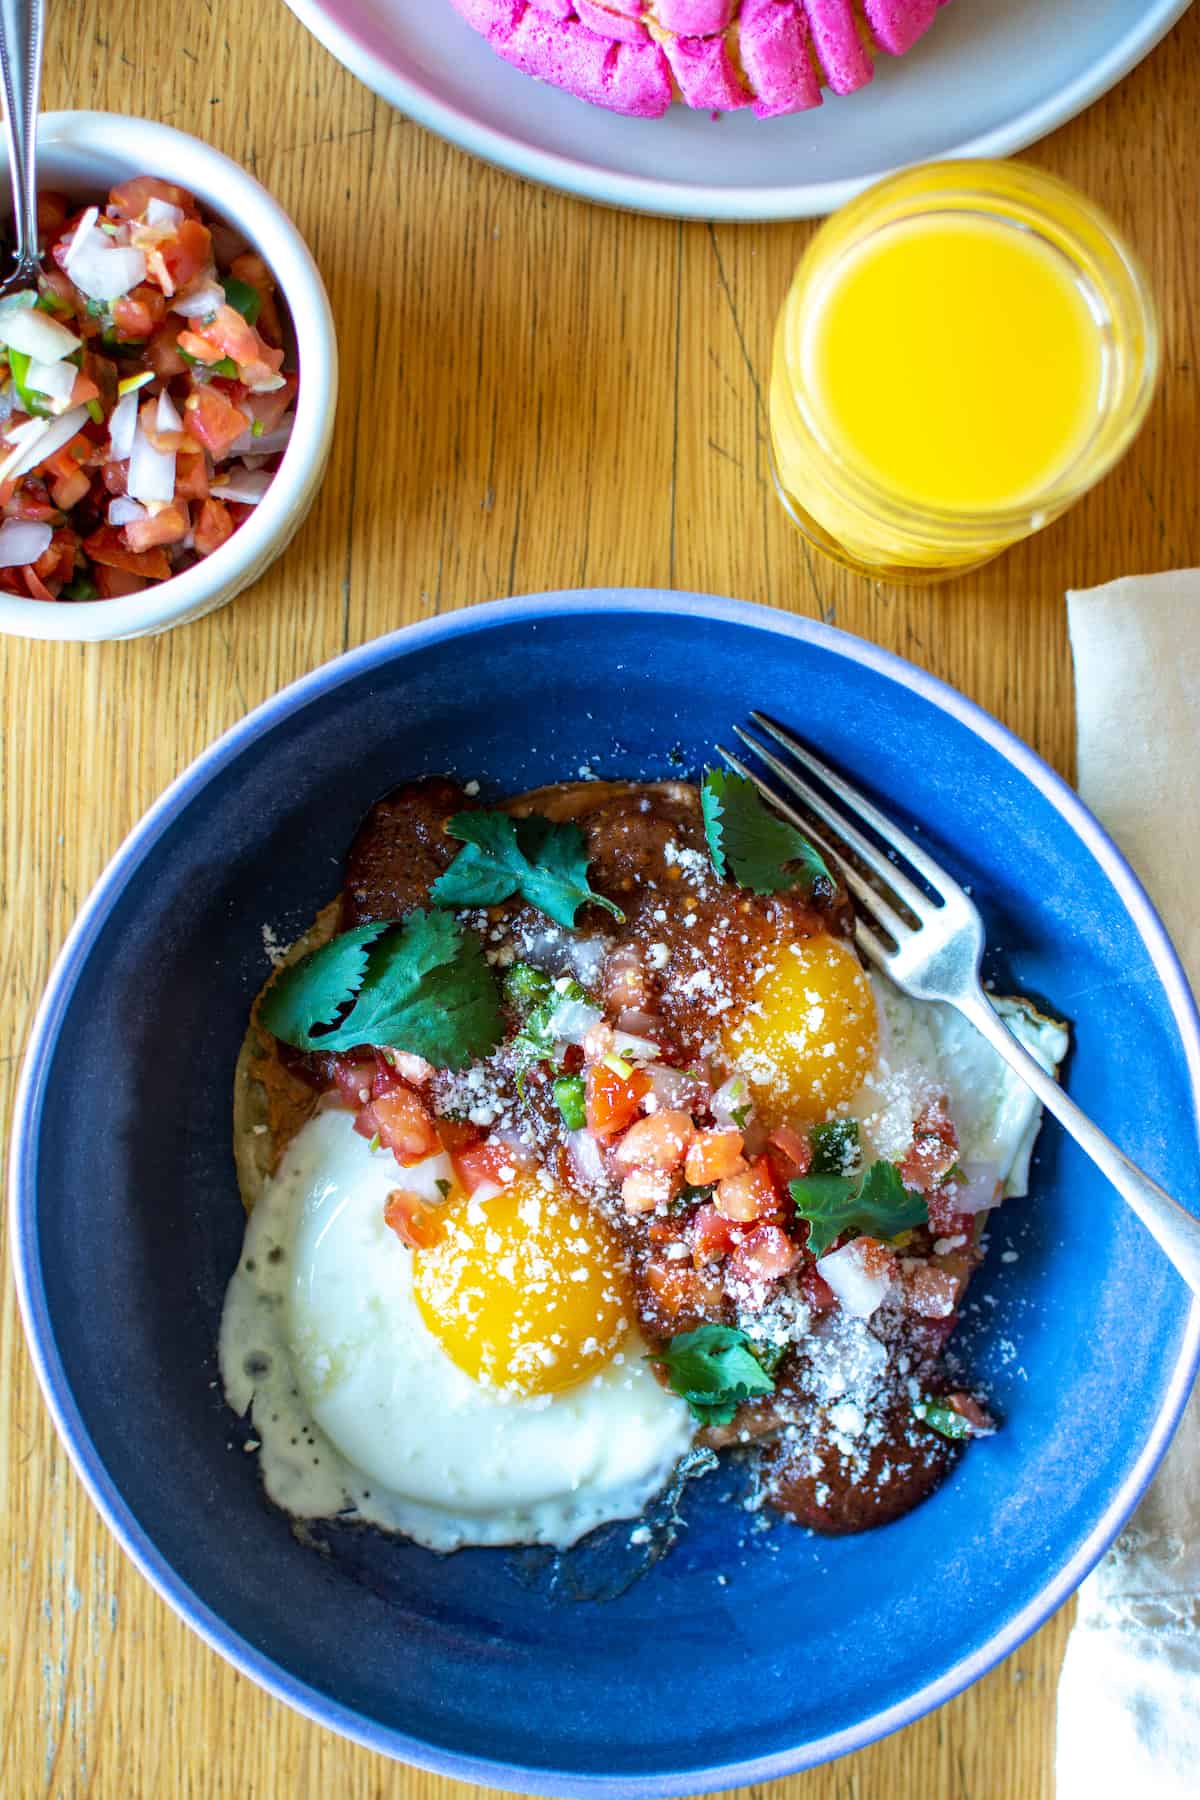 A blue plate of Huevos Rancheros on a kitchen table with orange juice.